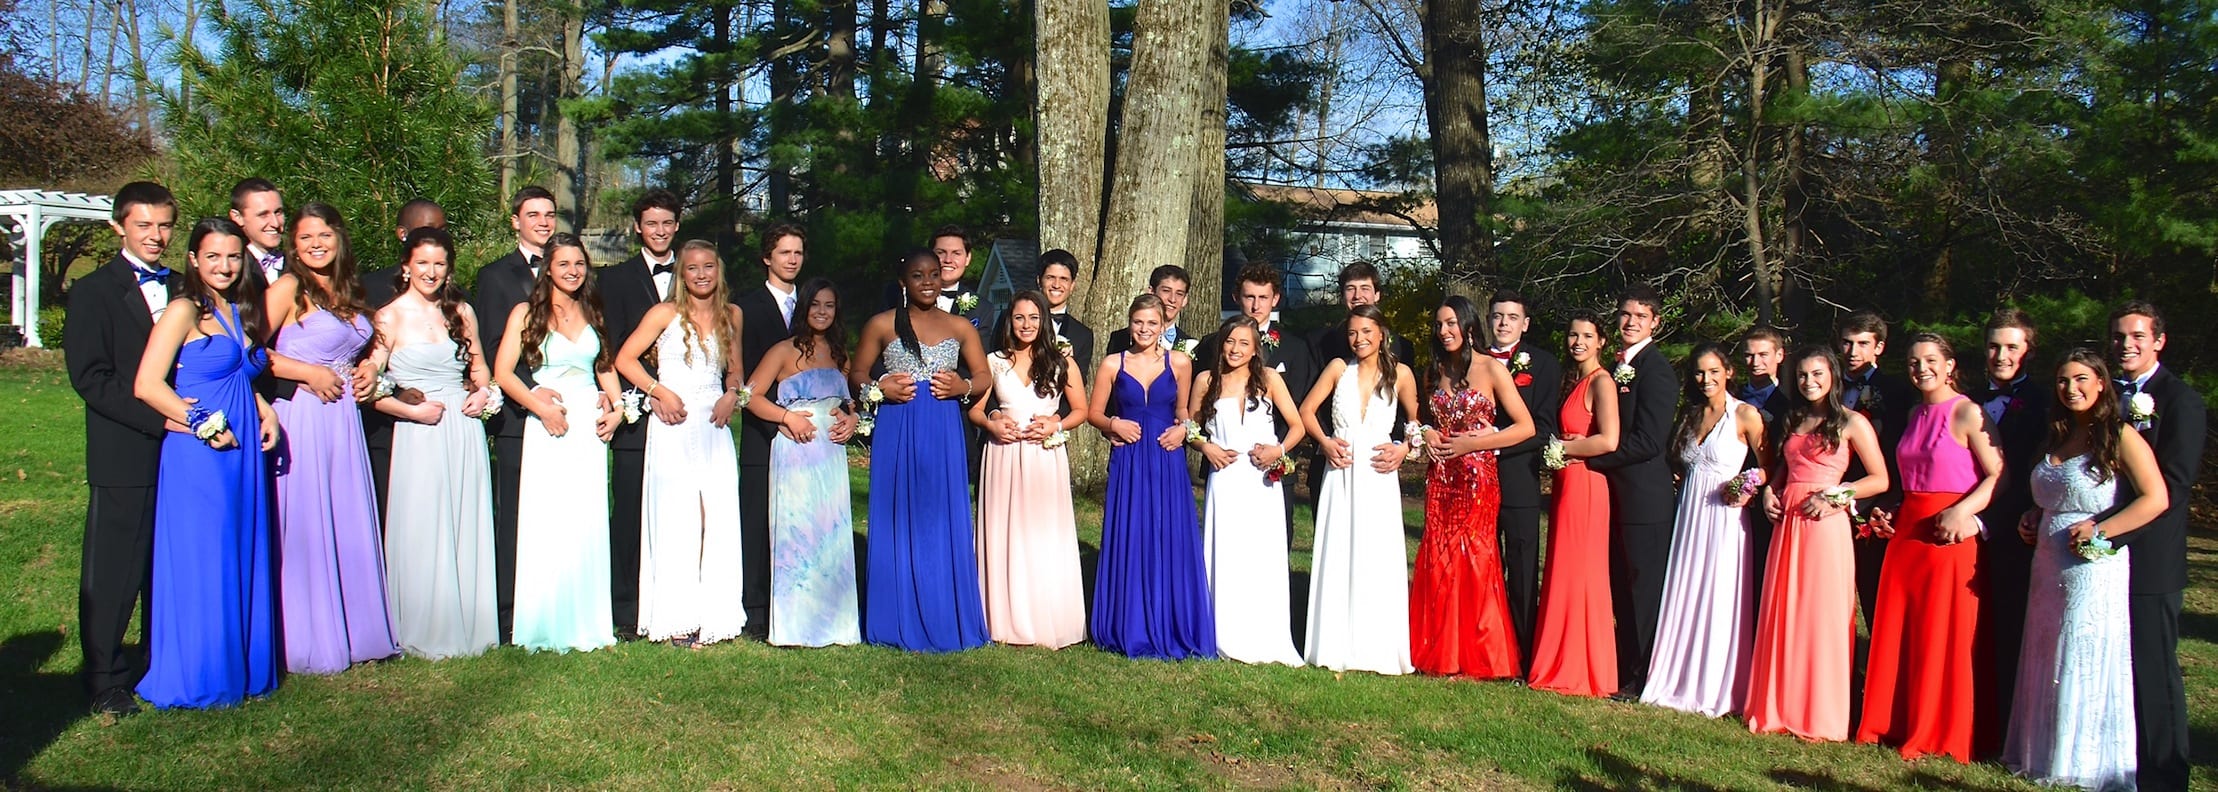 Prom Group.